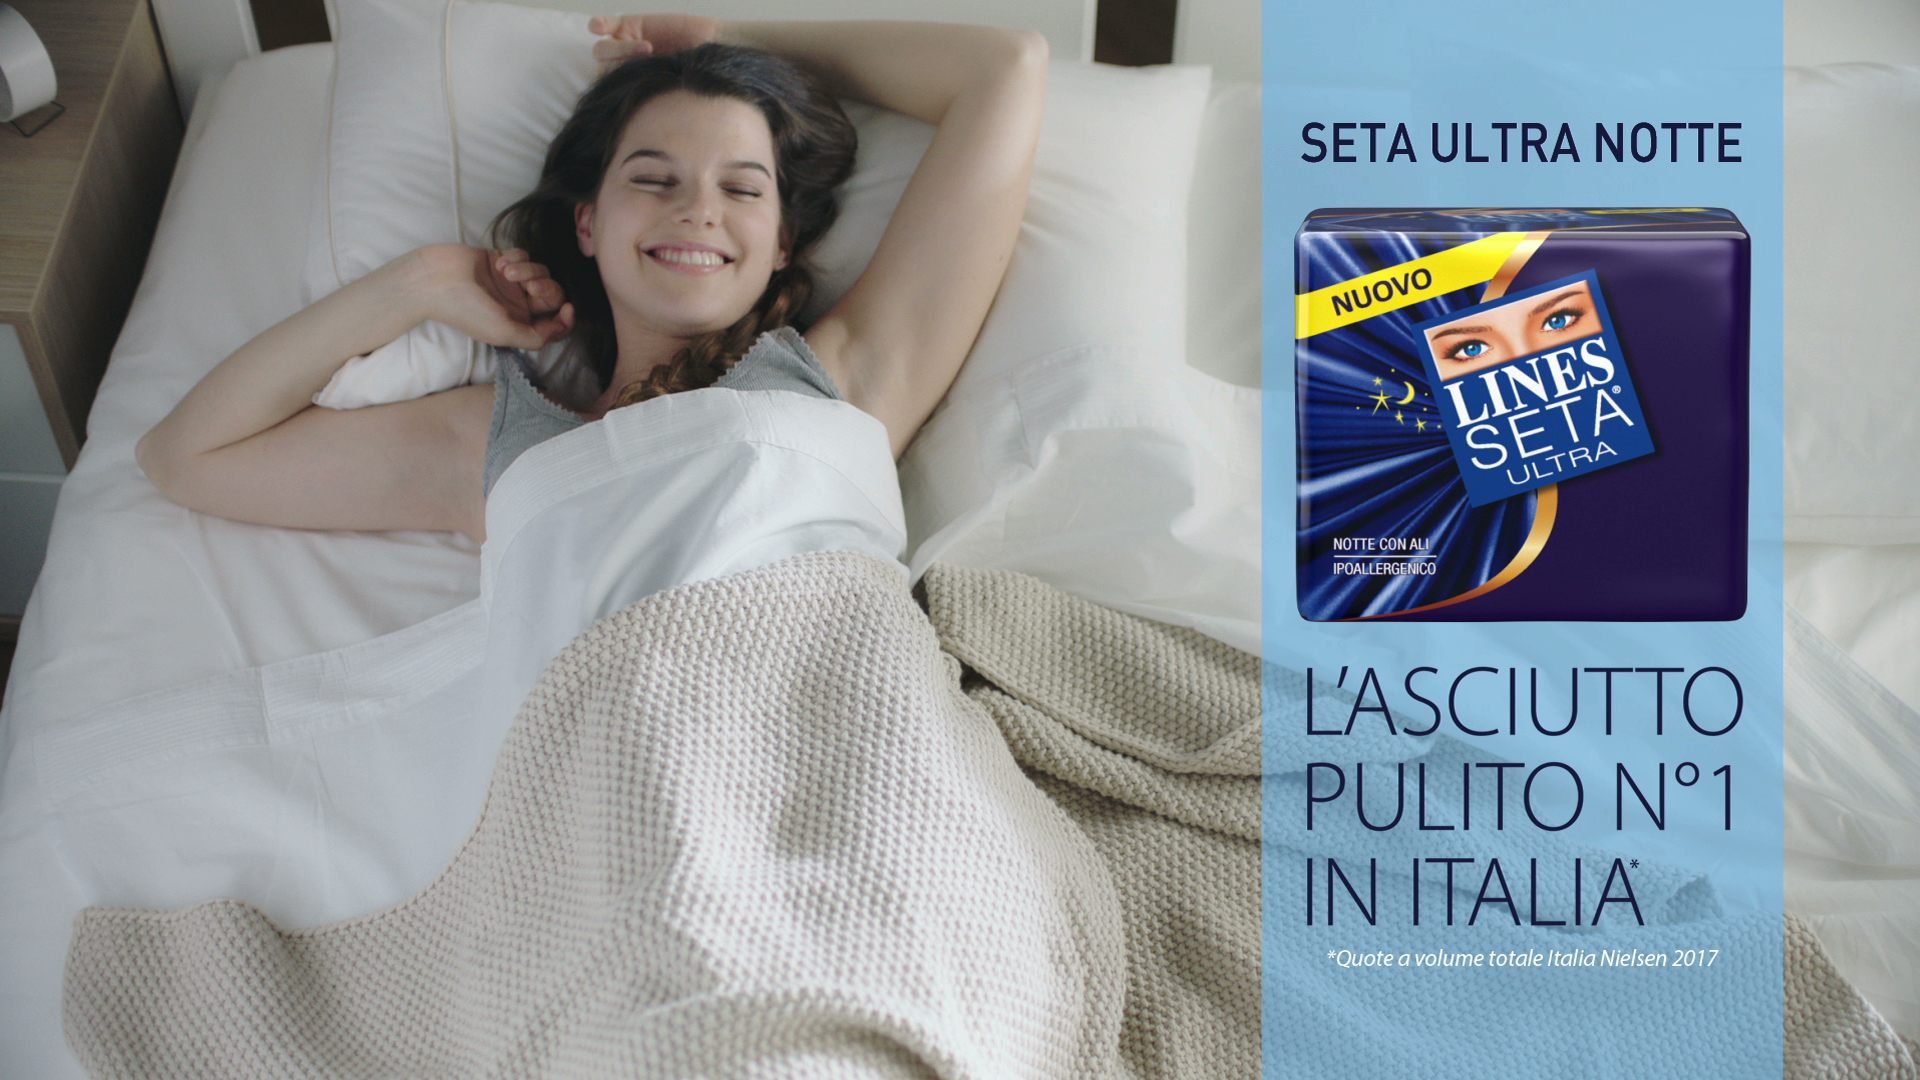 LINES SETA ULTRA NOTTE. THE FREEDOM OF CLEAN DRYNESS.